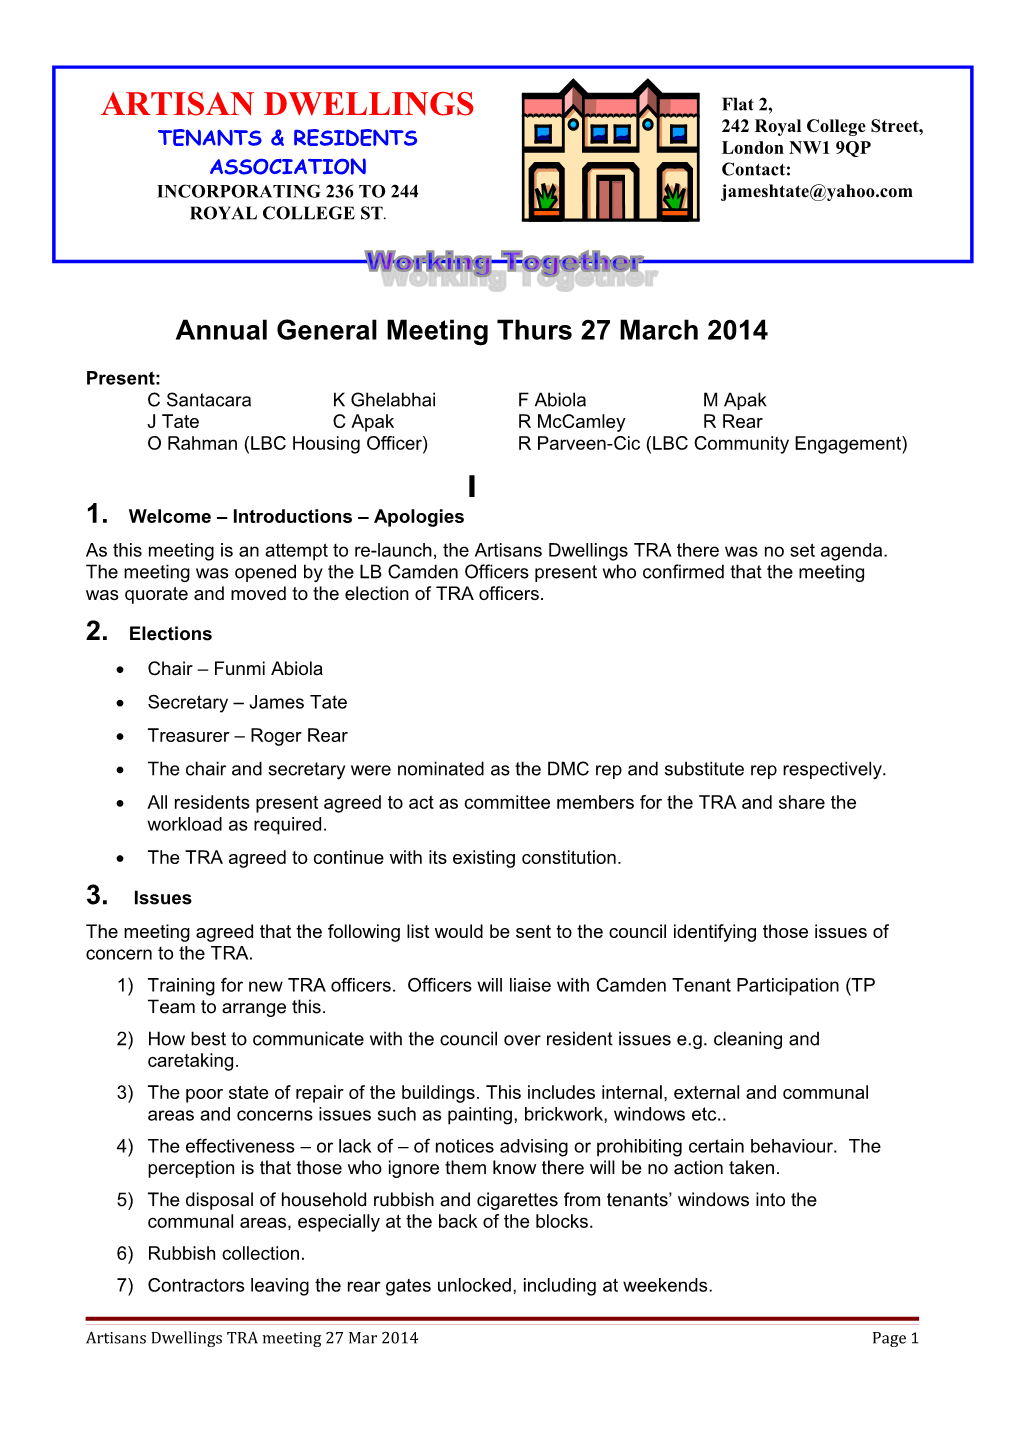 Annual General Meeting Thurs 27 March 2014